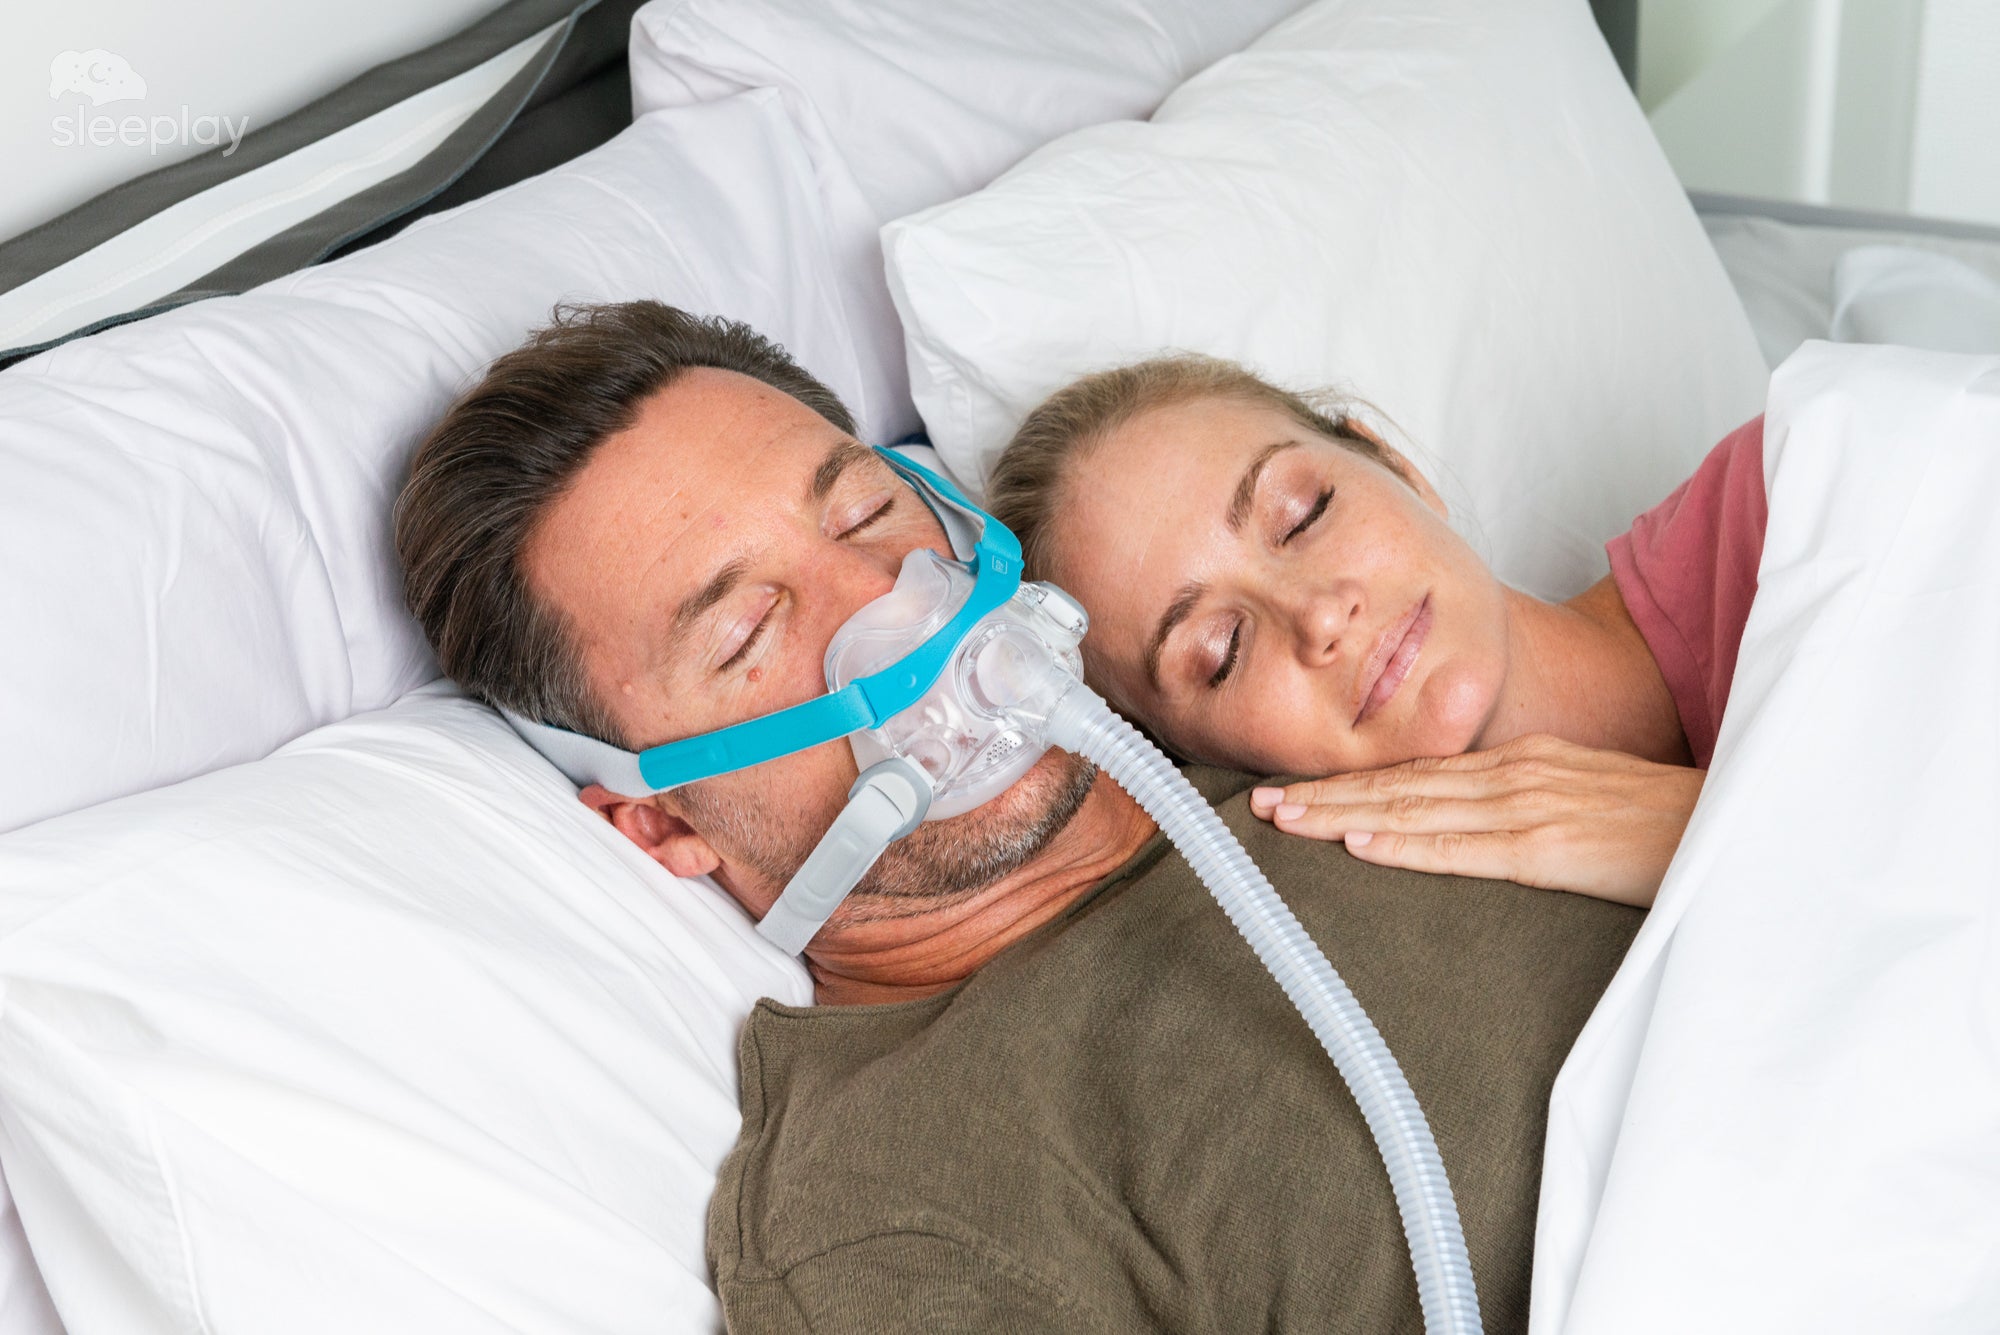 CPAP machines - Find the best CPAP machine for you - ResMed